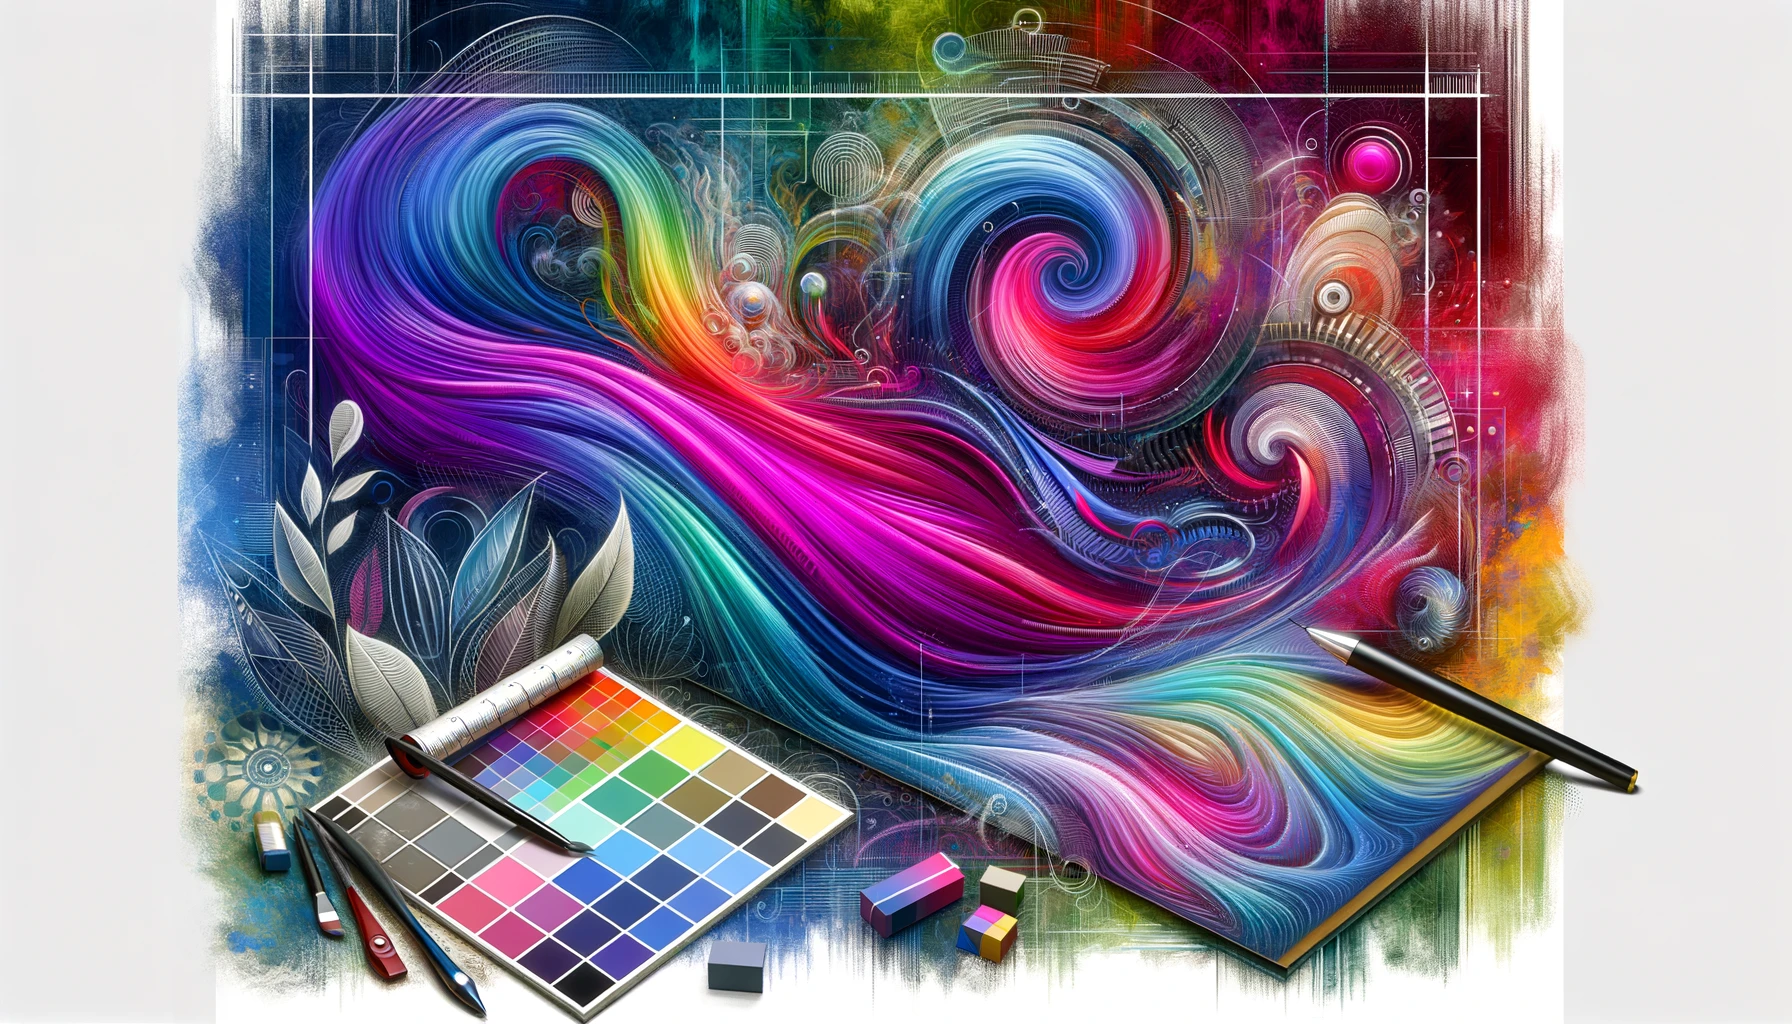 A lovely display of various colors for web designing.